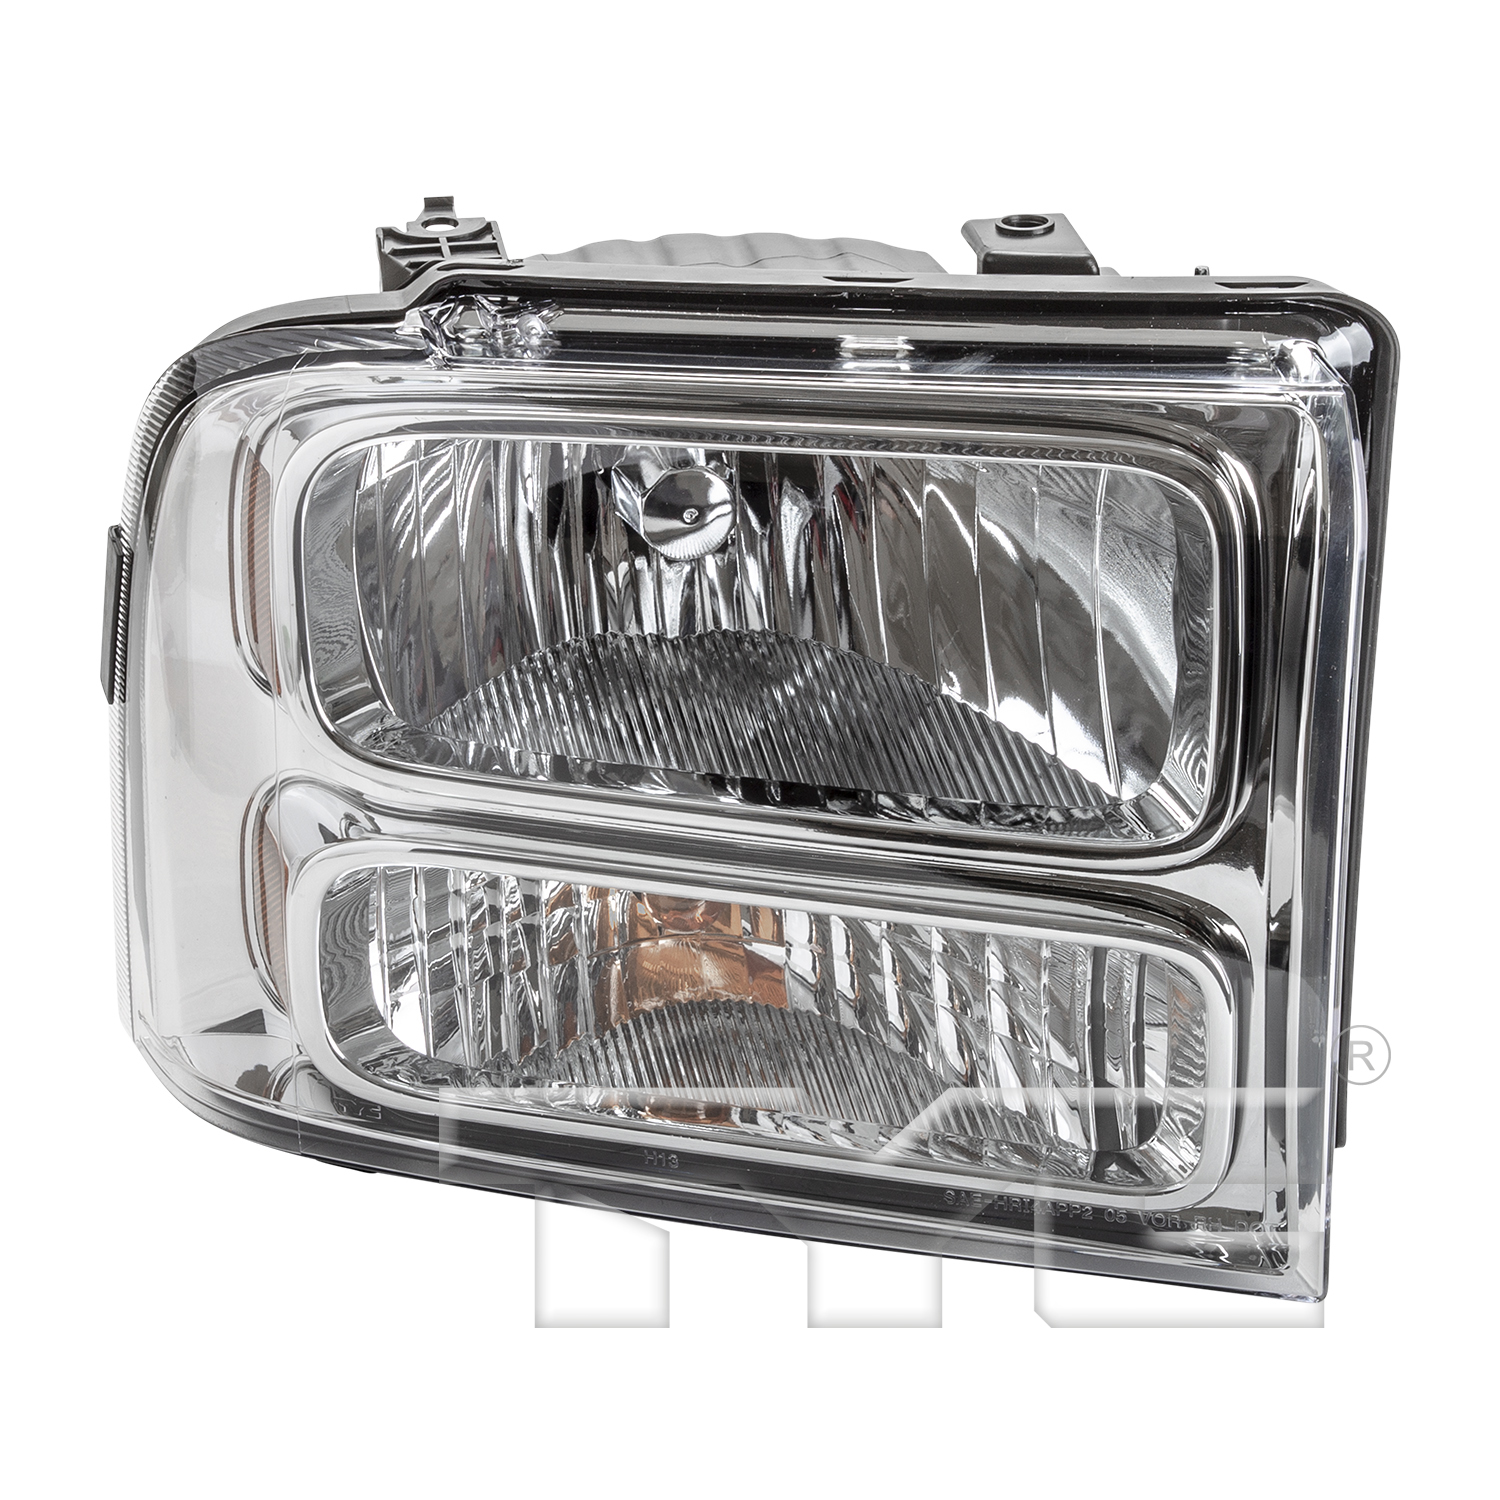 Aftermarket HEADLIGHTS for FORD - F-350 SUPER DUTY, F-350 SUPER DUTY,04-07,RT Headlamp assy composite